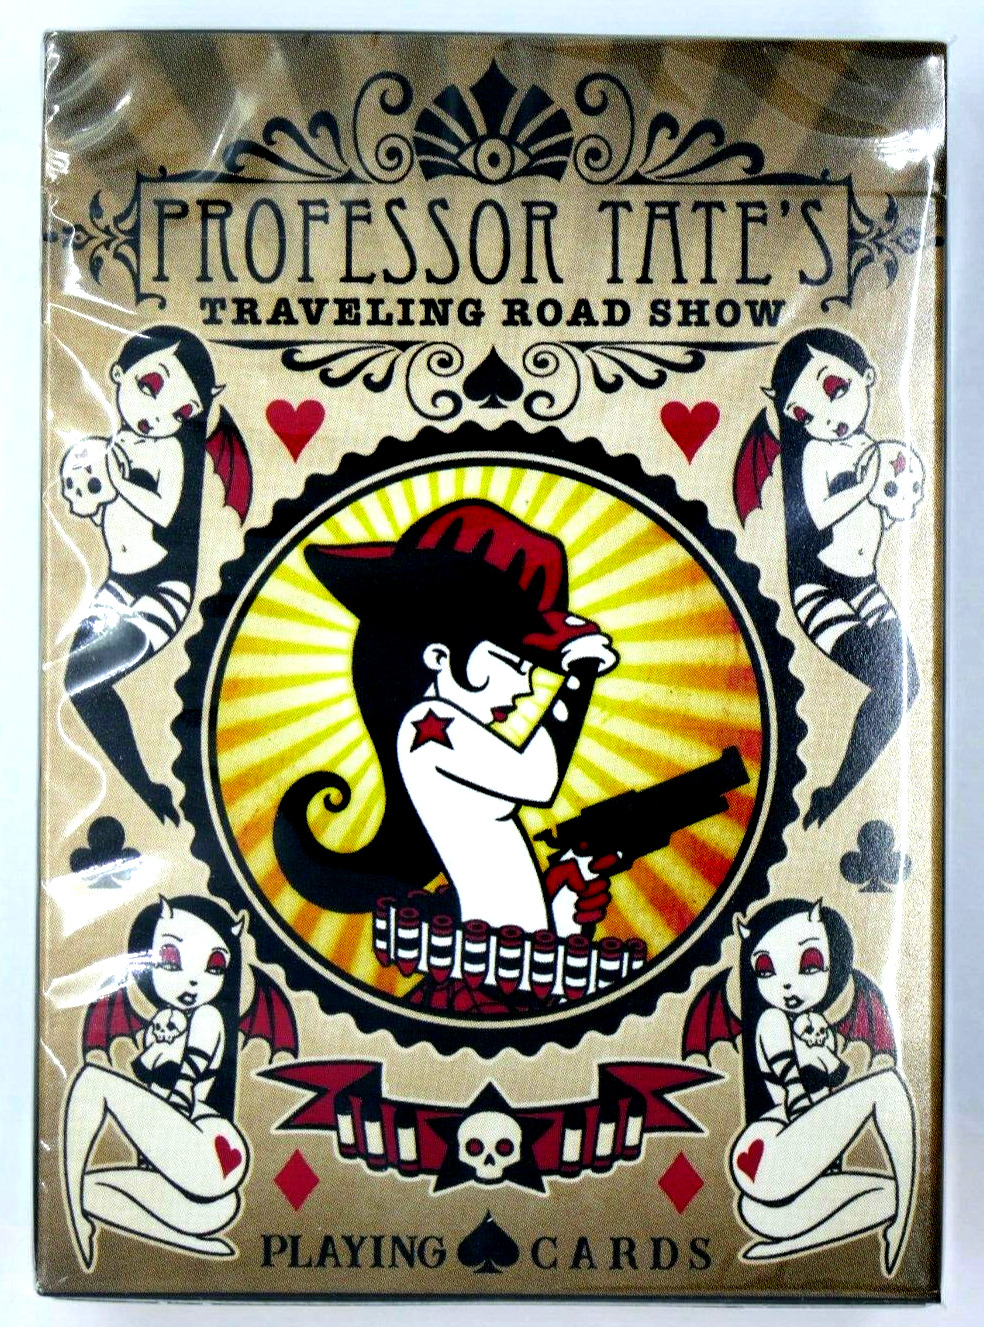 Playing Cards Deck Professor Tate's Travelling Road Show Vintage Poker Limited